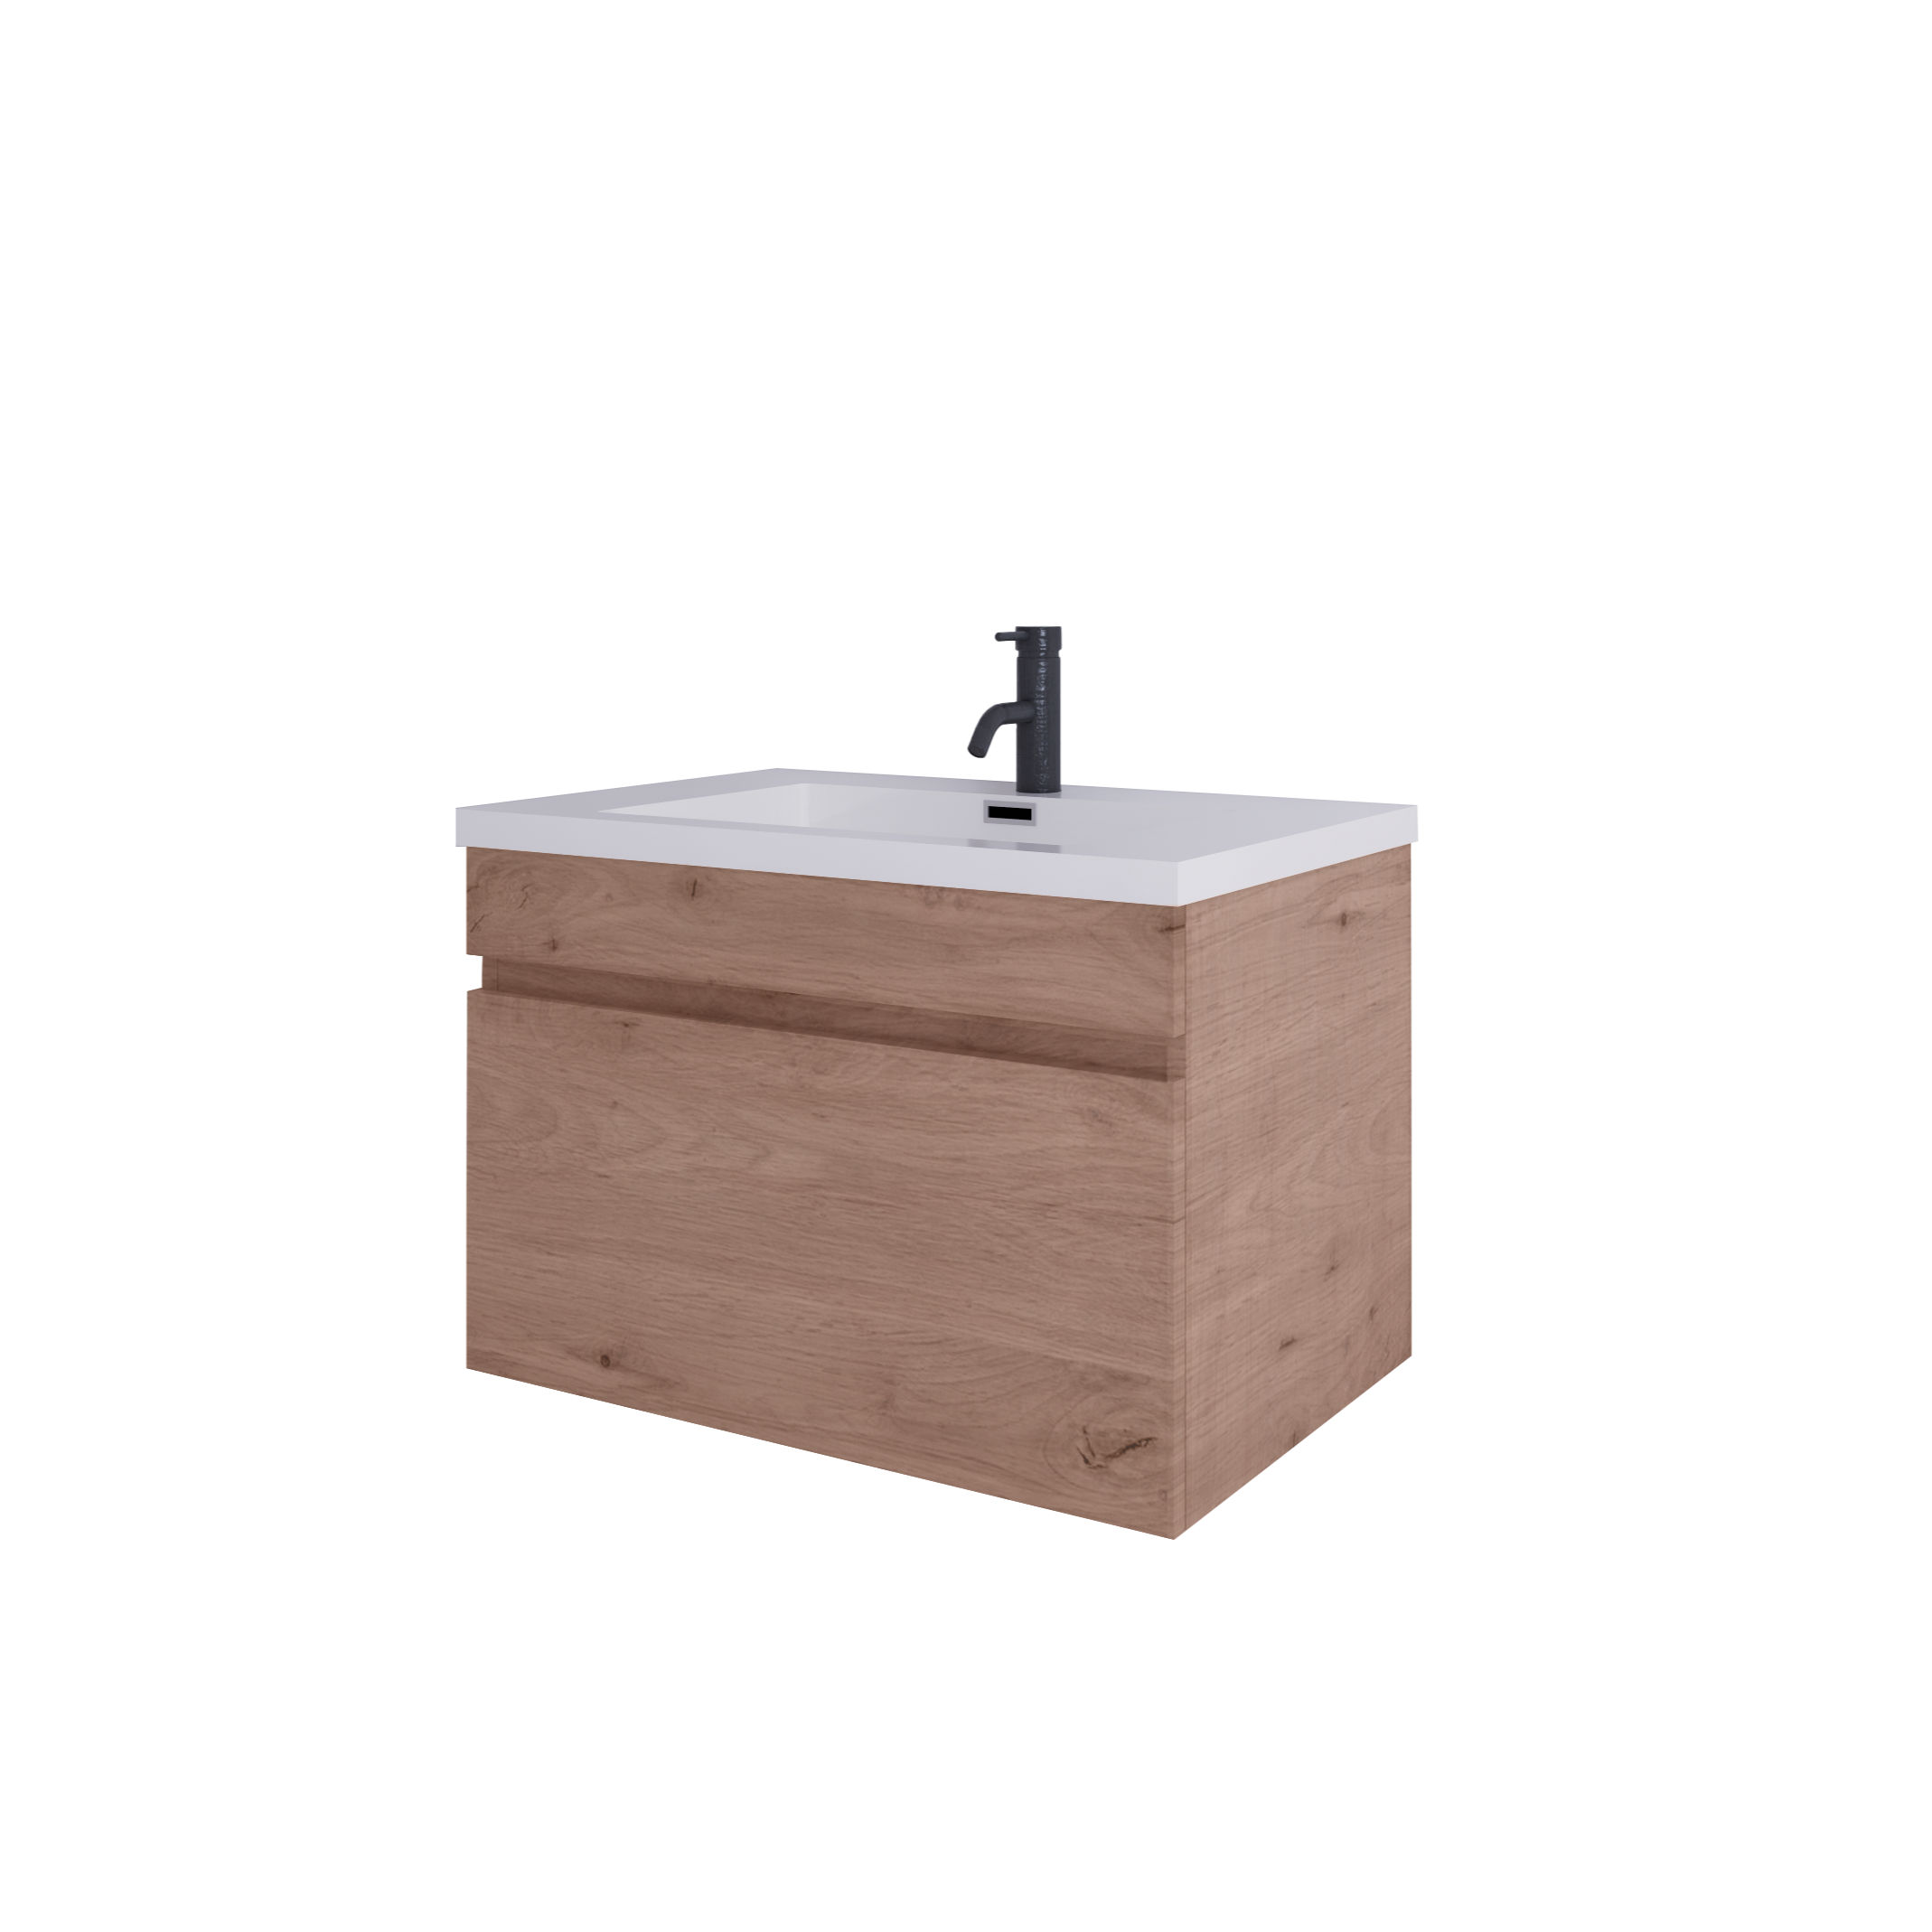 LUX 600 SINGLE DRAWER WALL-HUNG VANITY